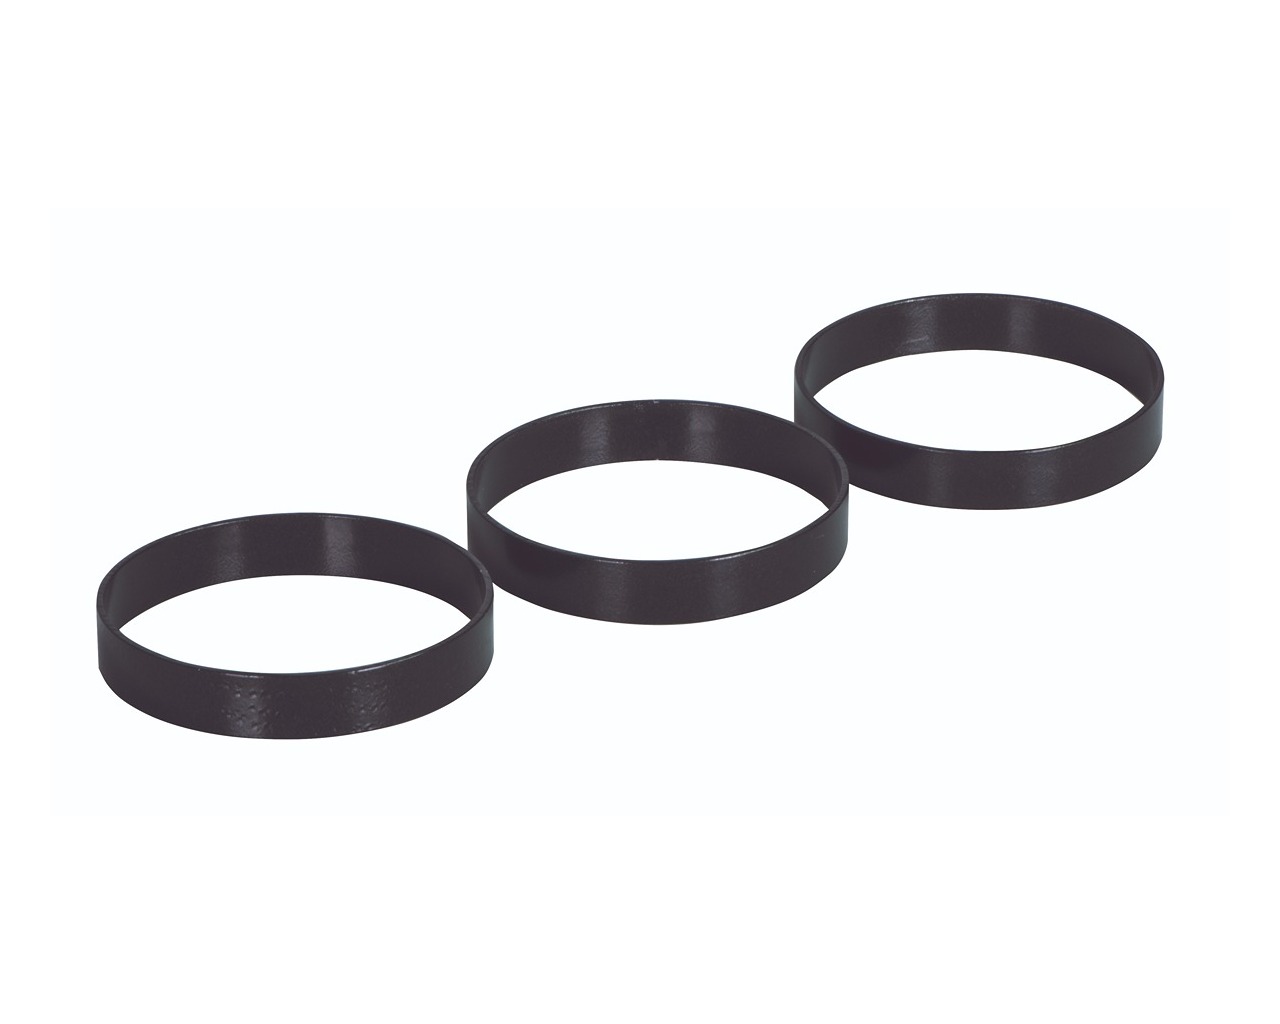 Avanti Non-Stick Egg Rings - Set of 3, , hi-res image number null